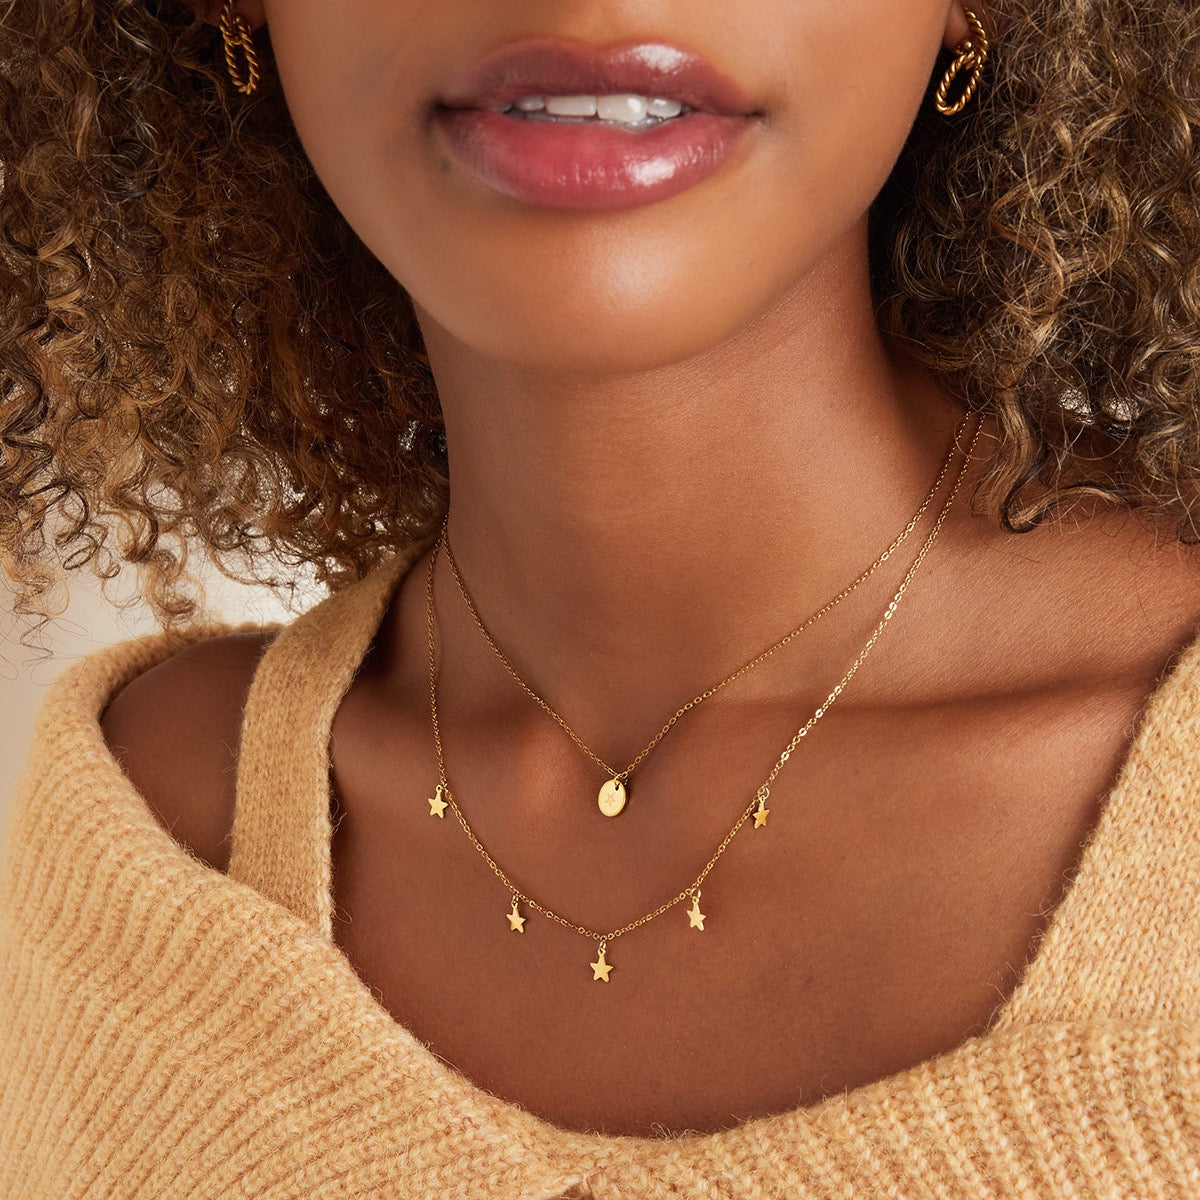 Full of Stars Necklace Gold